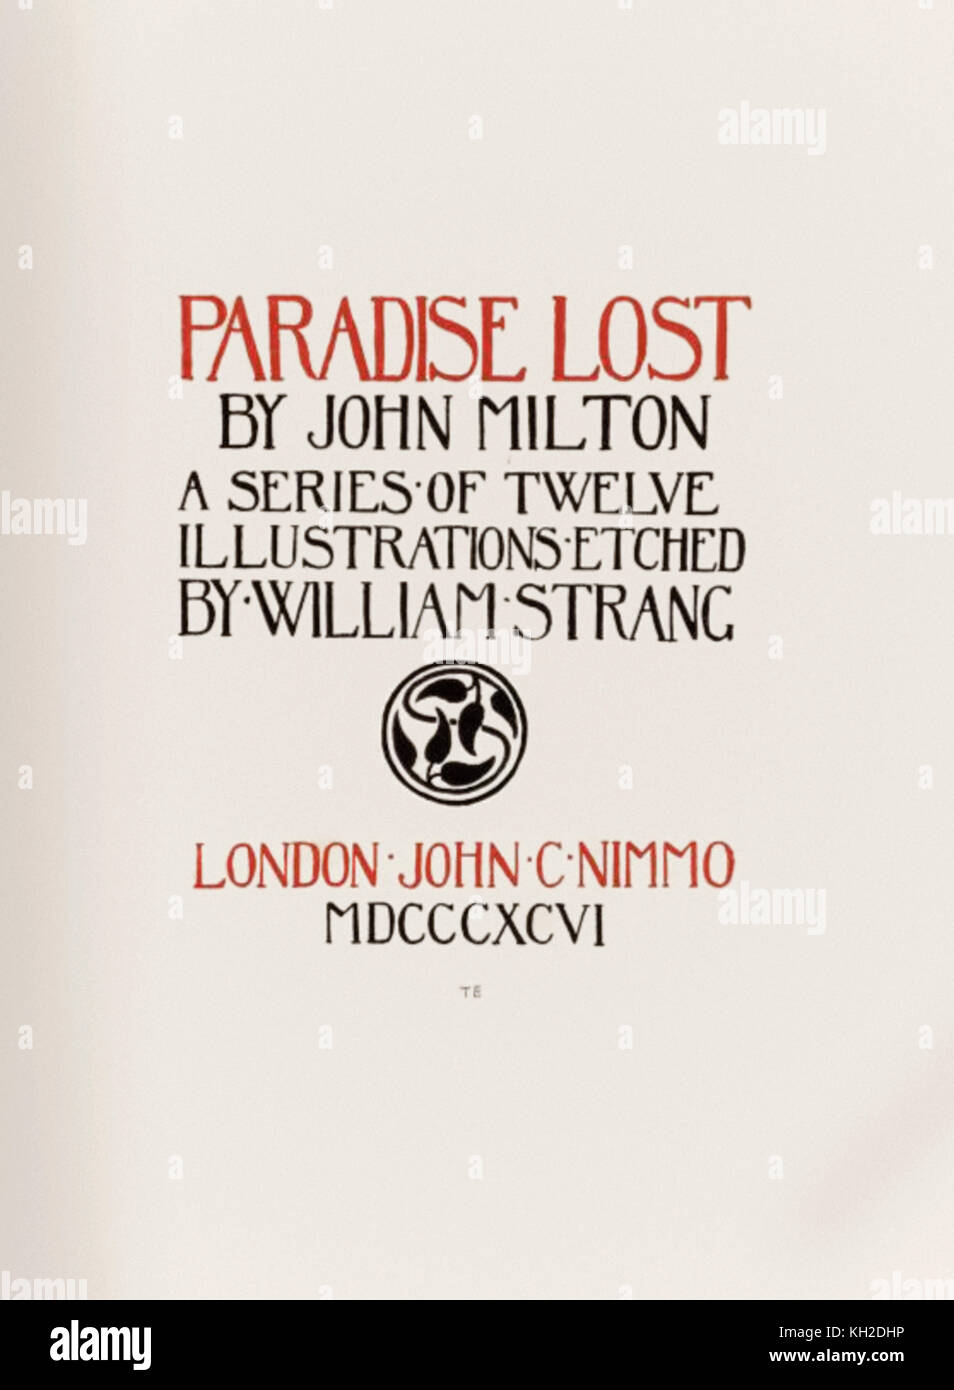 Letterpress title page from ‘Paradise Lost’ by John Milton (1608-1674) a series of 12 illustrations etched by William Strang (1859-1921). See more information below. Stock Photo